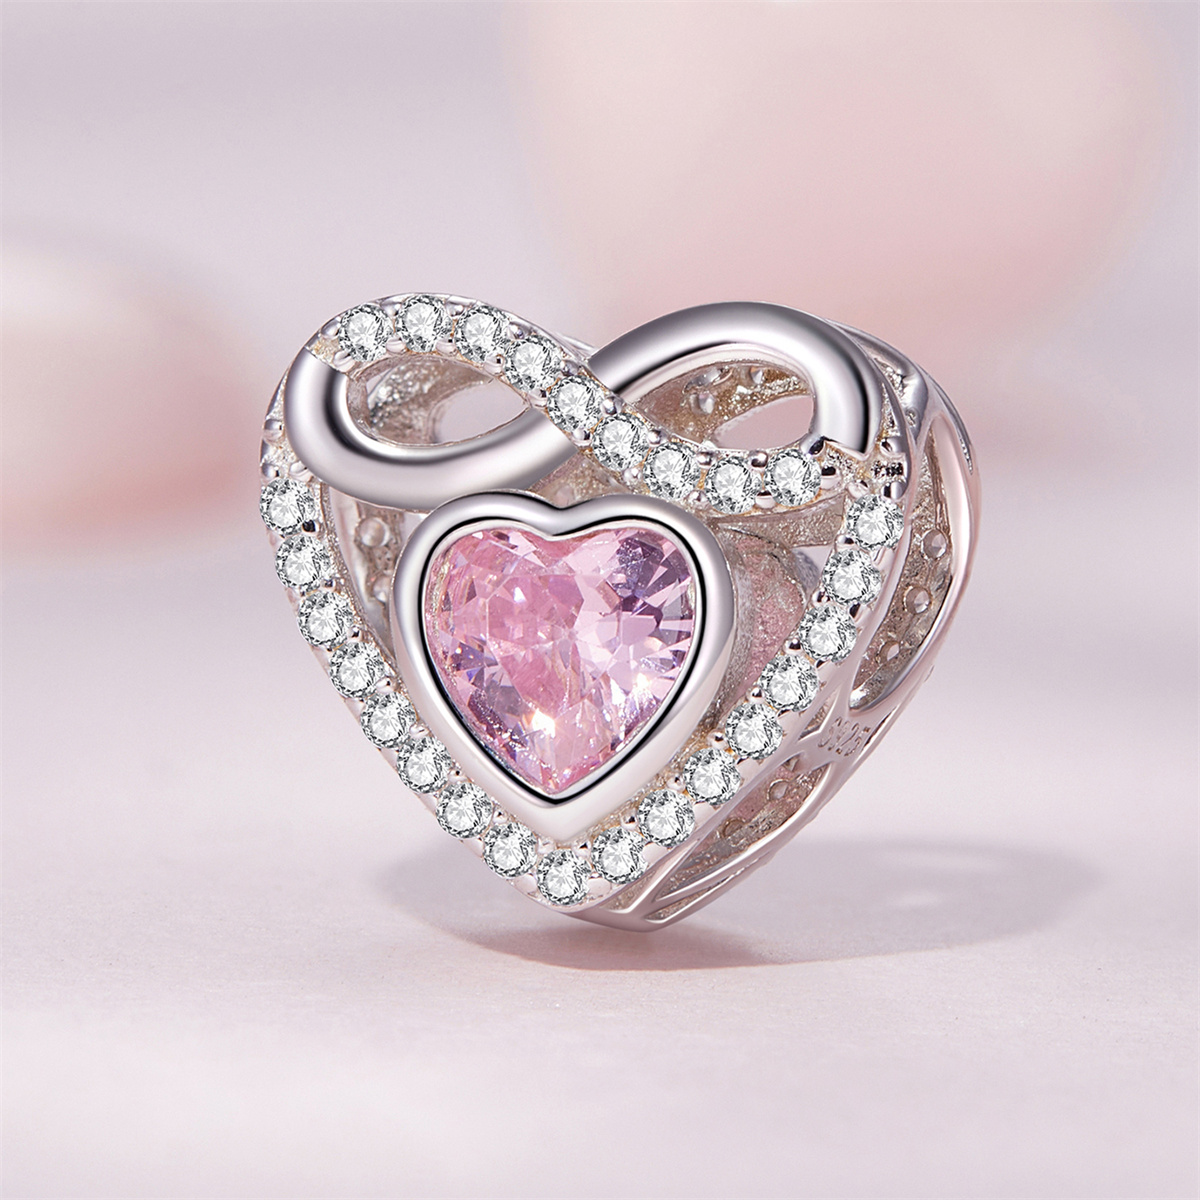 New 925 Sterling Silver Metallic Pink Heart Charm Beads Fit Pandora 925  Original Bracelet Charms for Women Pendant Jewelry Gift